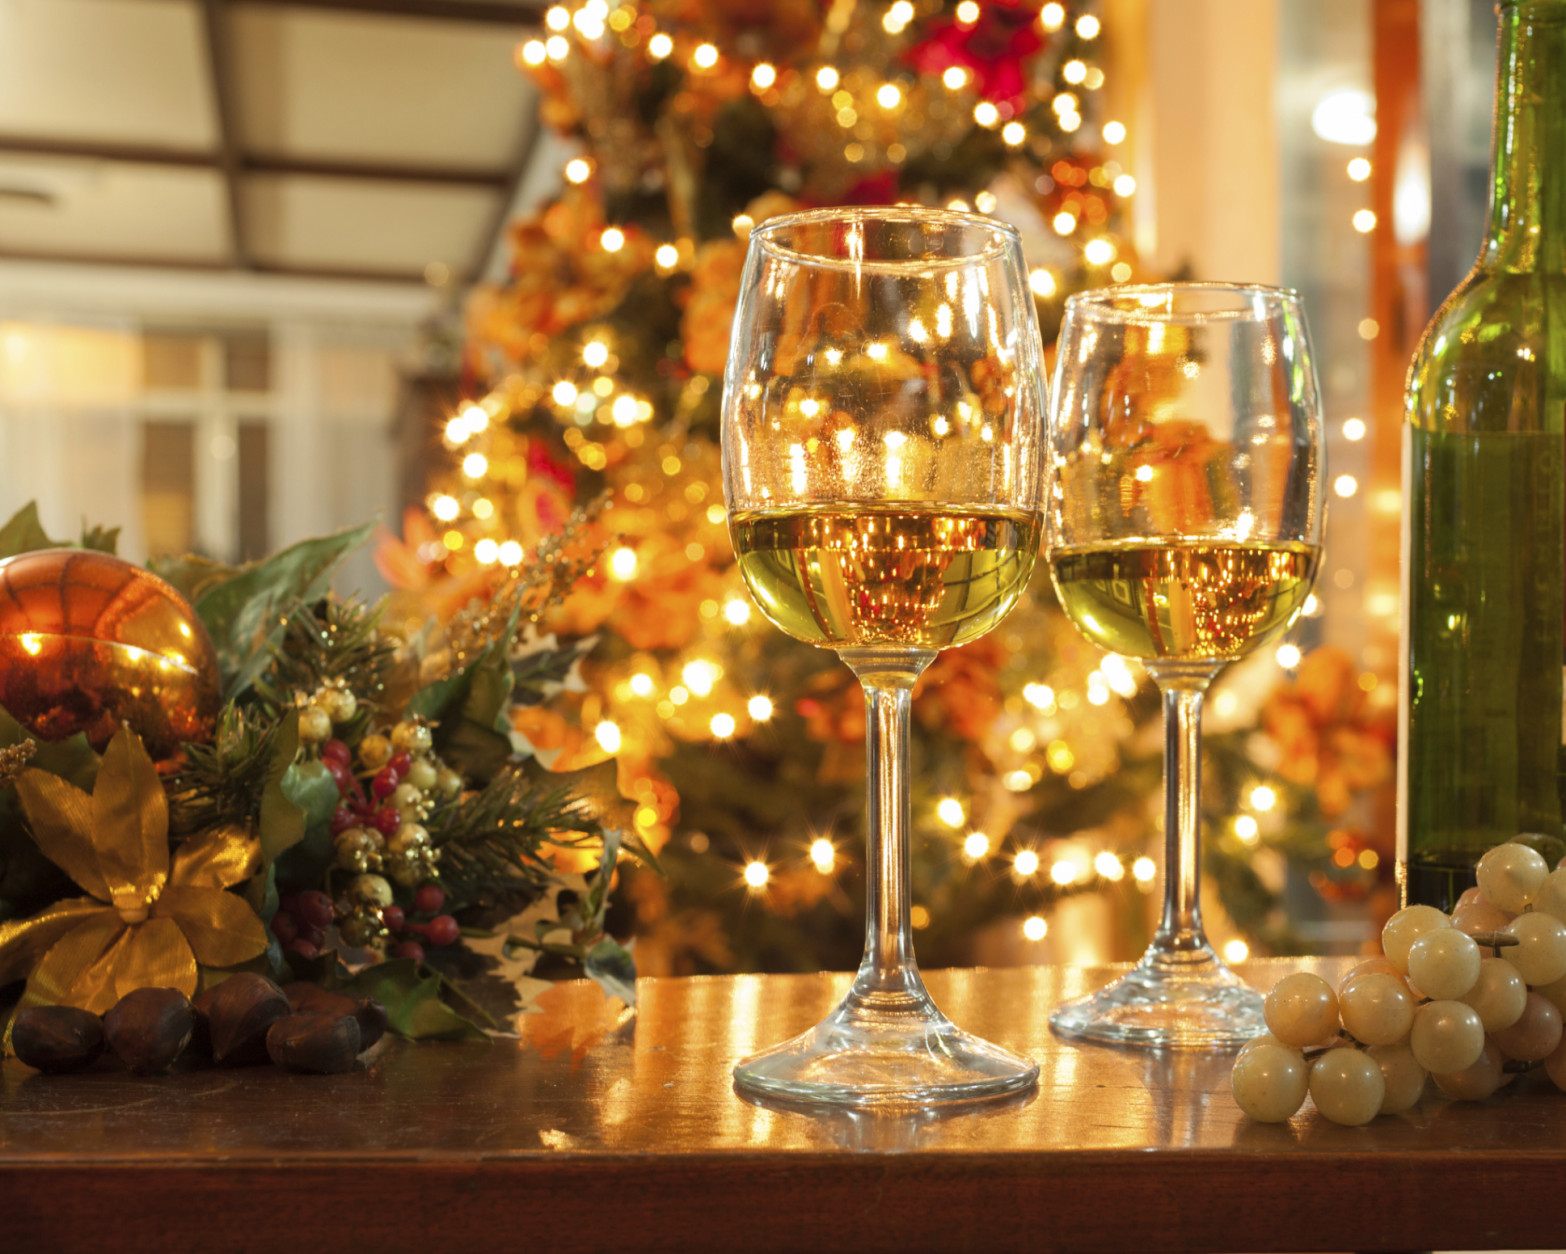 Wine of the Week ‘All I want for Christmas’ holiday buying guide